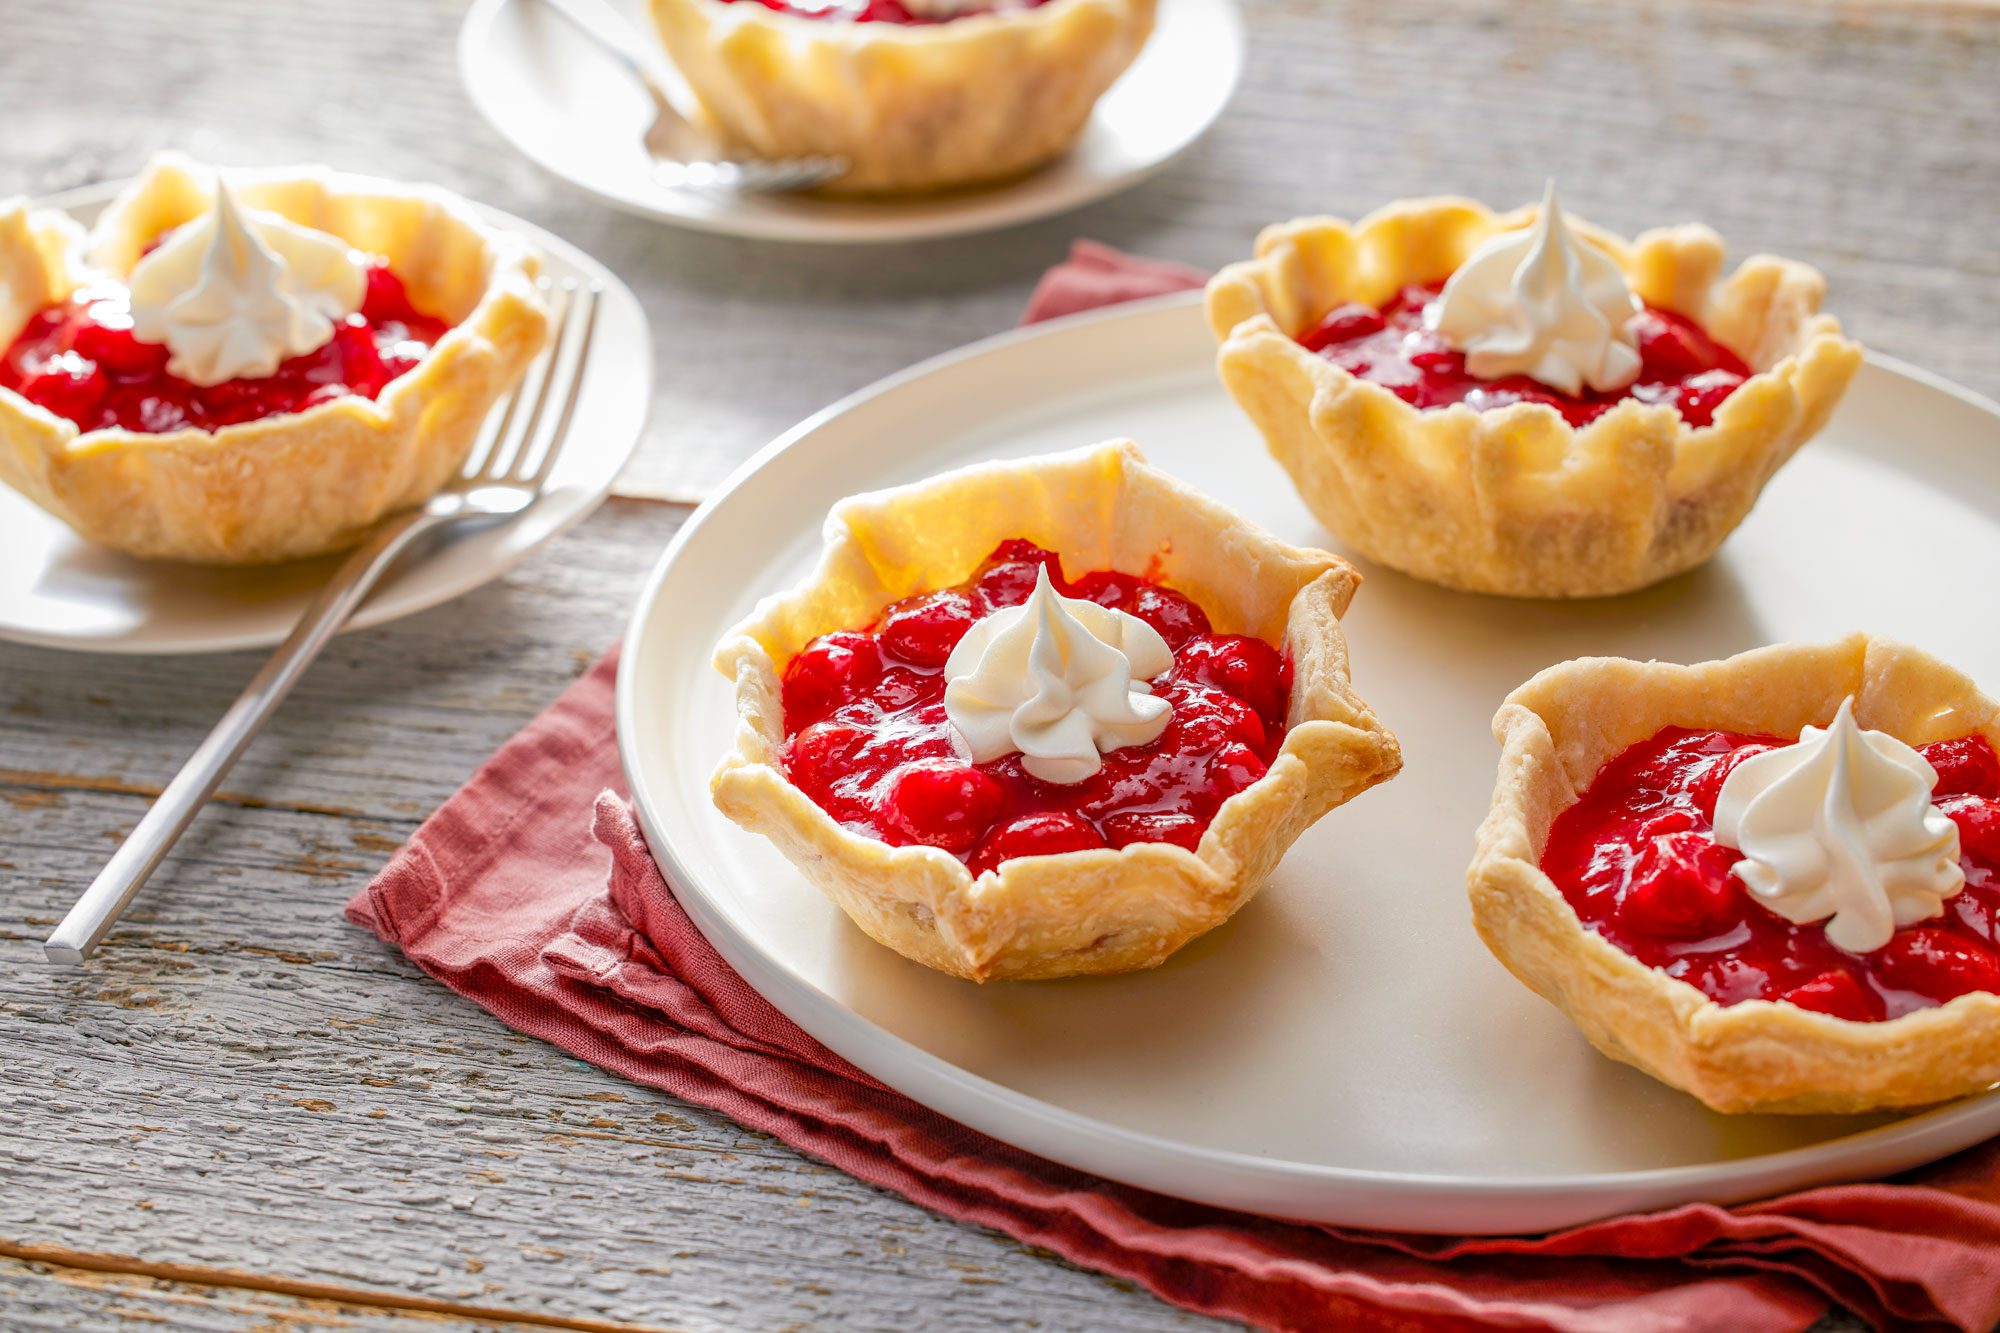 Cherry Tarts Served in a Plate on Wooden Surface